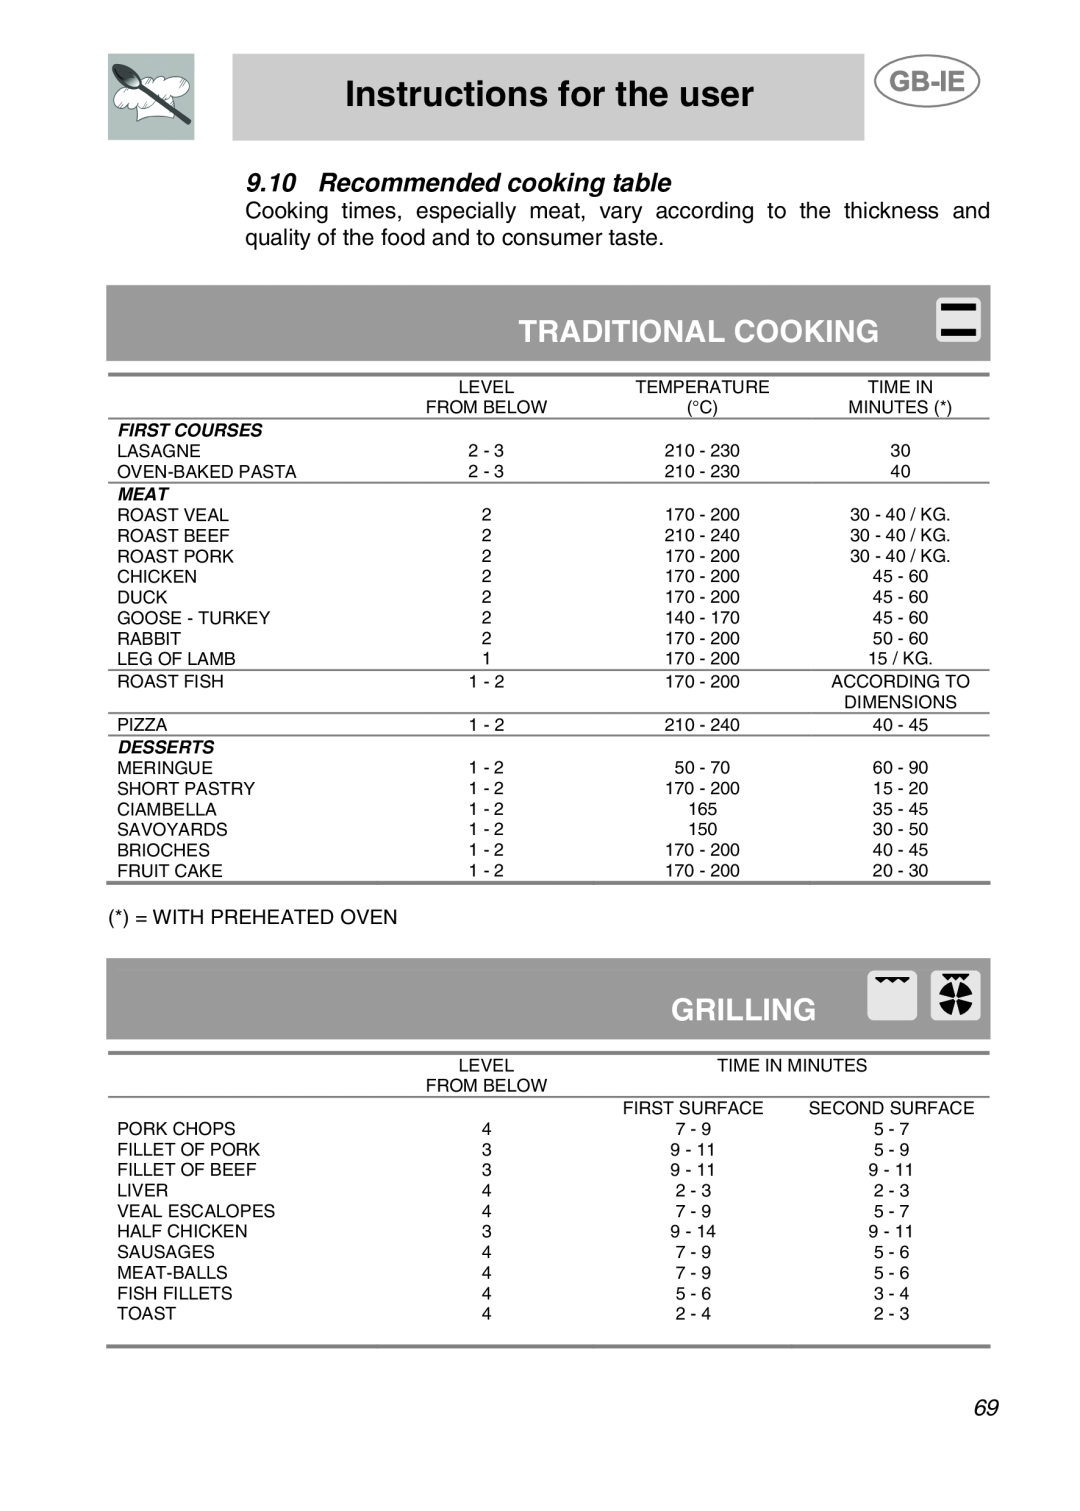 Smeg CS120A-6 Traditional Cooking, Grilling, Recommended cooking table, Instructions for the user, First Courses, Meat 